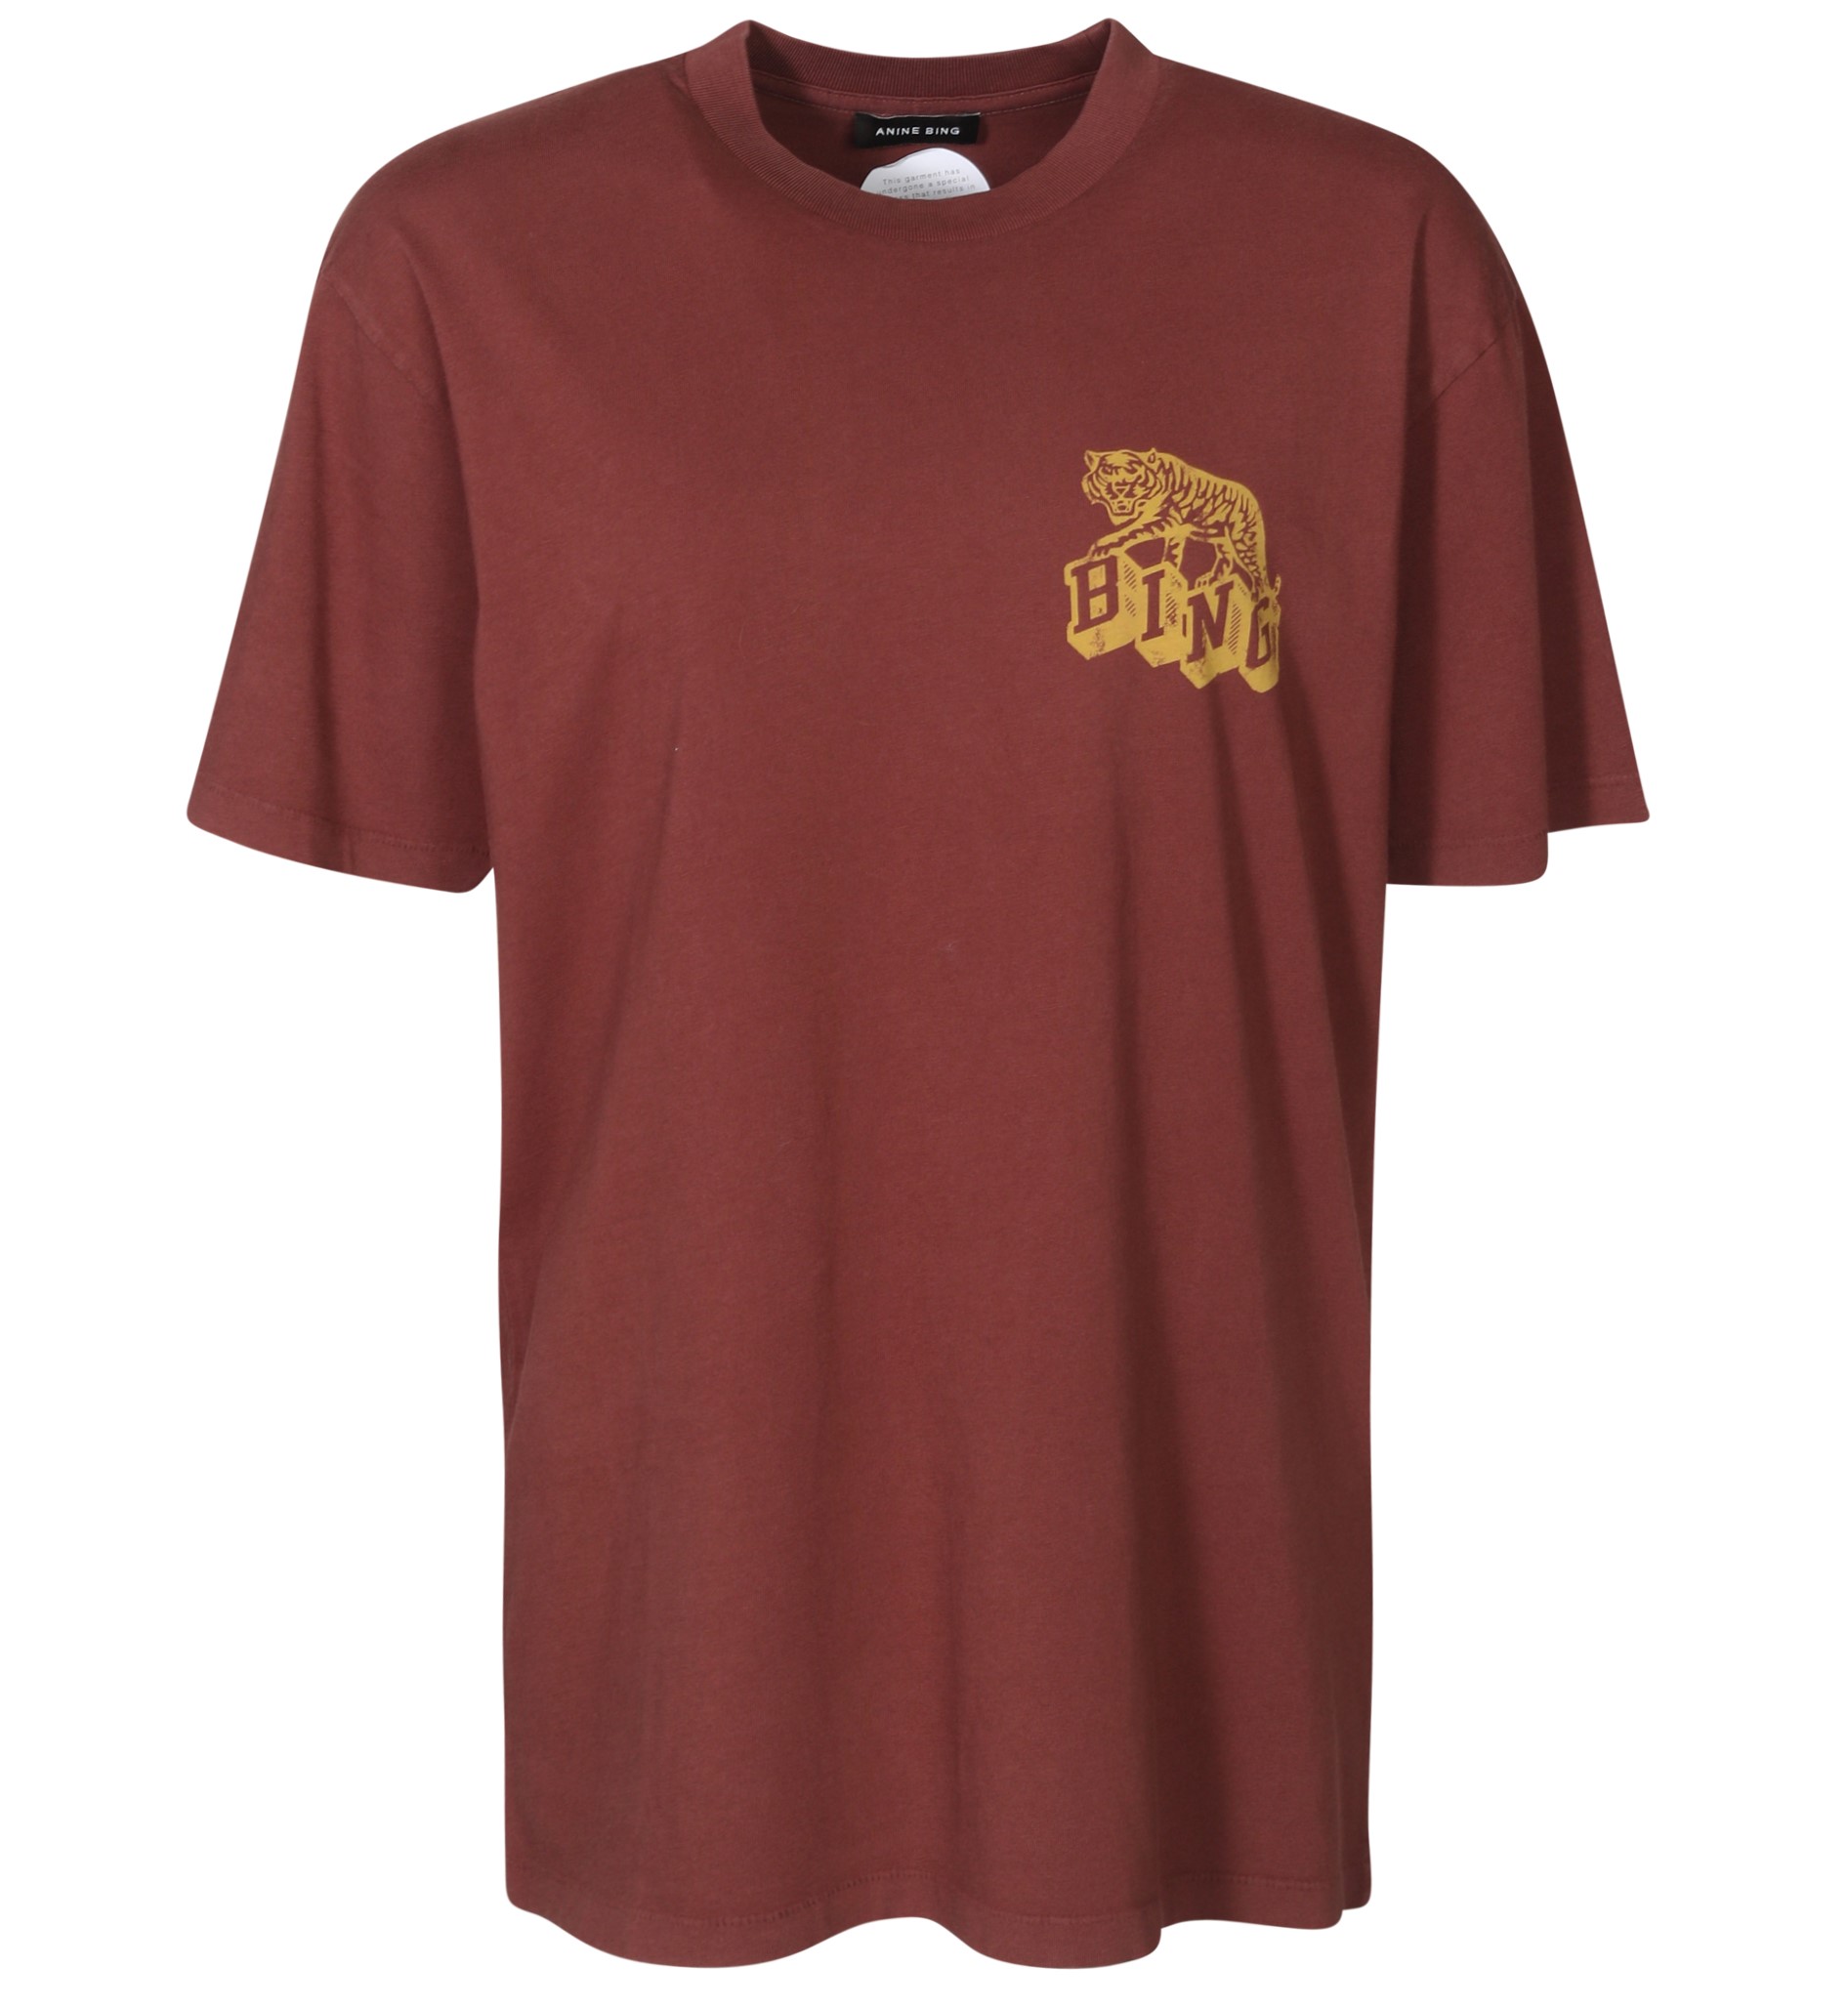 ANINE BING Walker Tee Retro Tiger in Washed Faded Cherry M